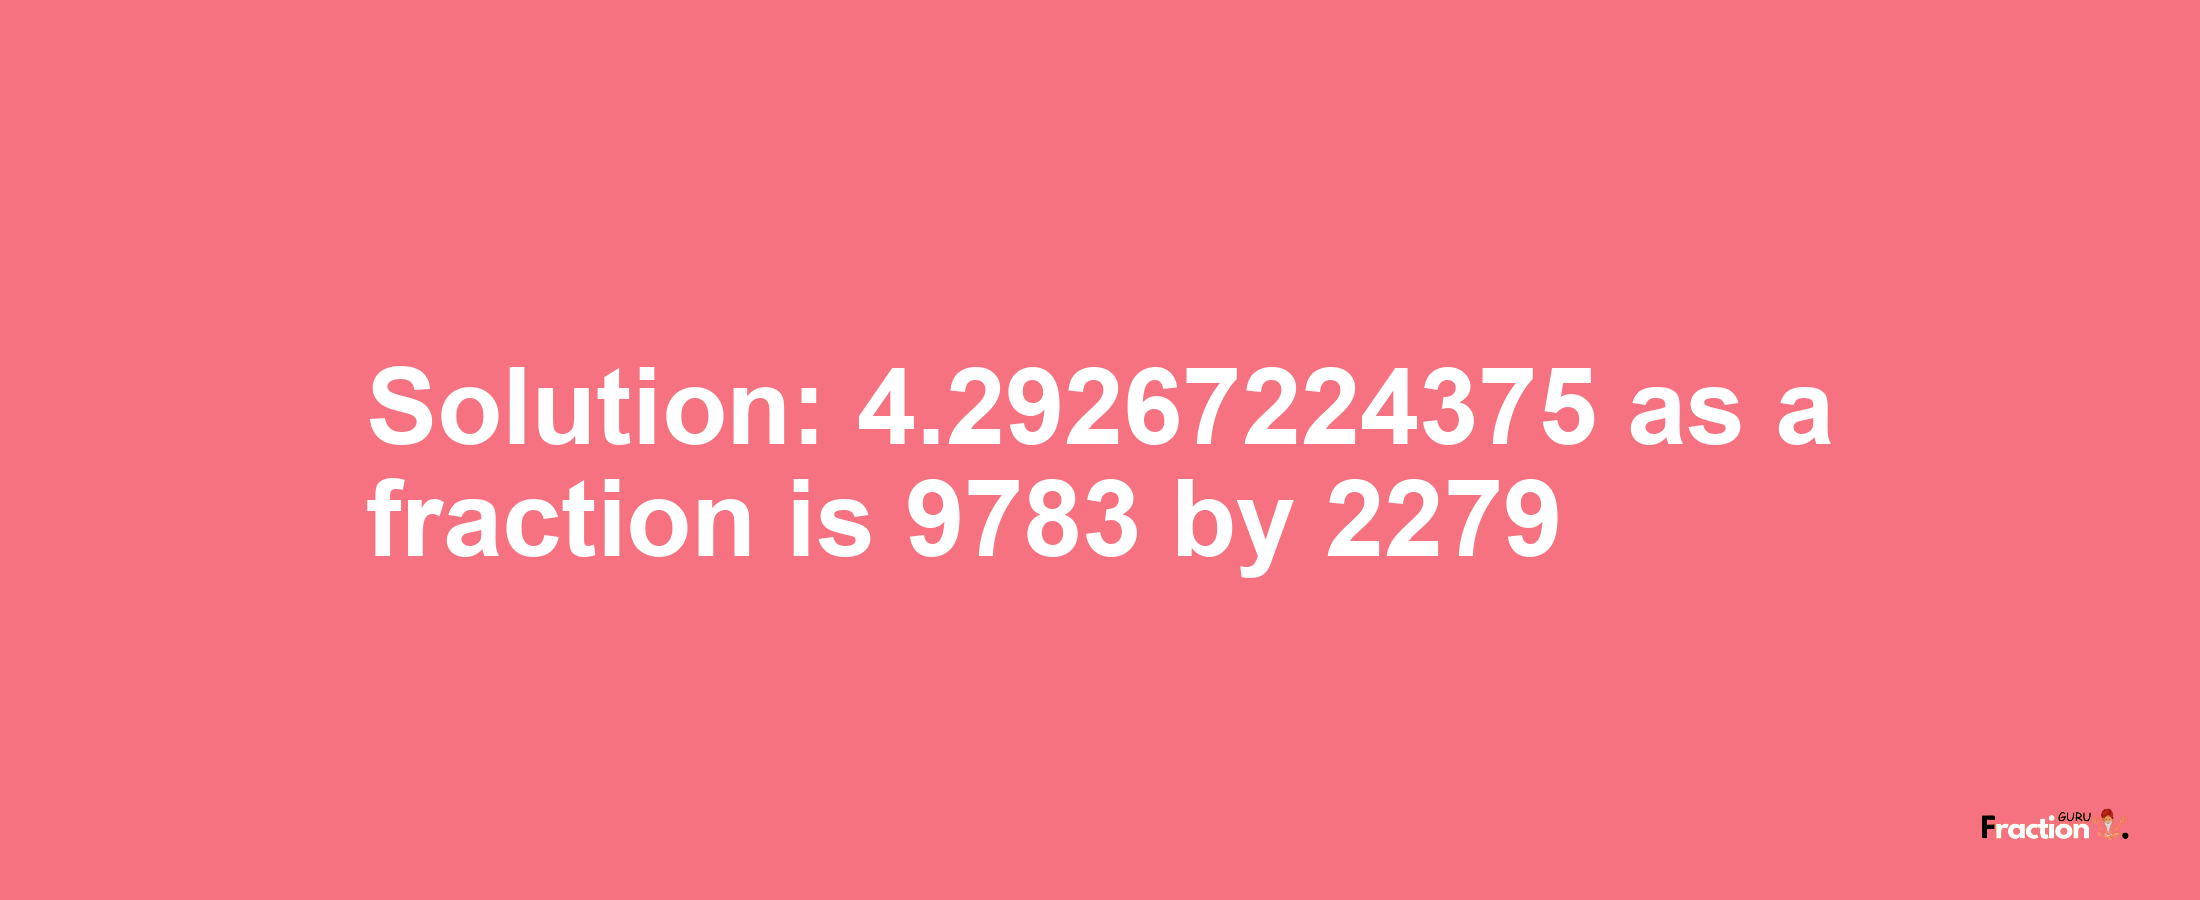 Solution:4.29267224375 as a fraction is 9783/2279